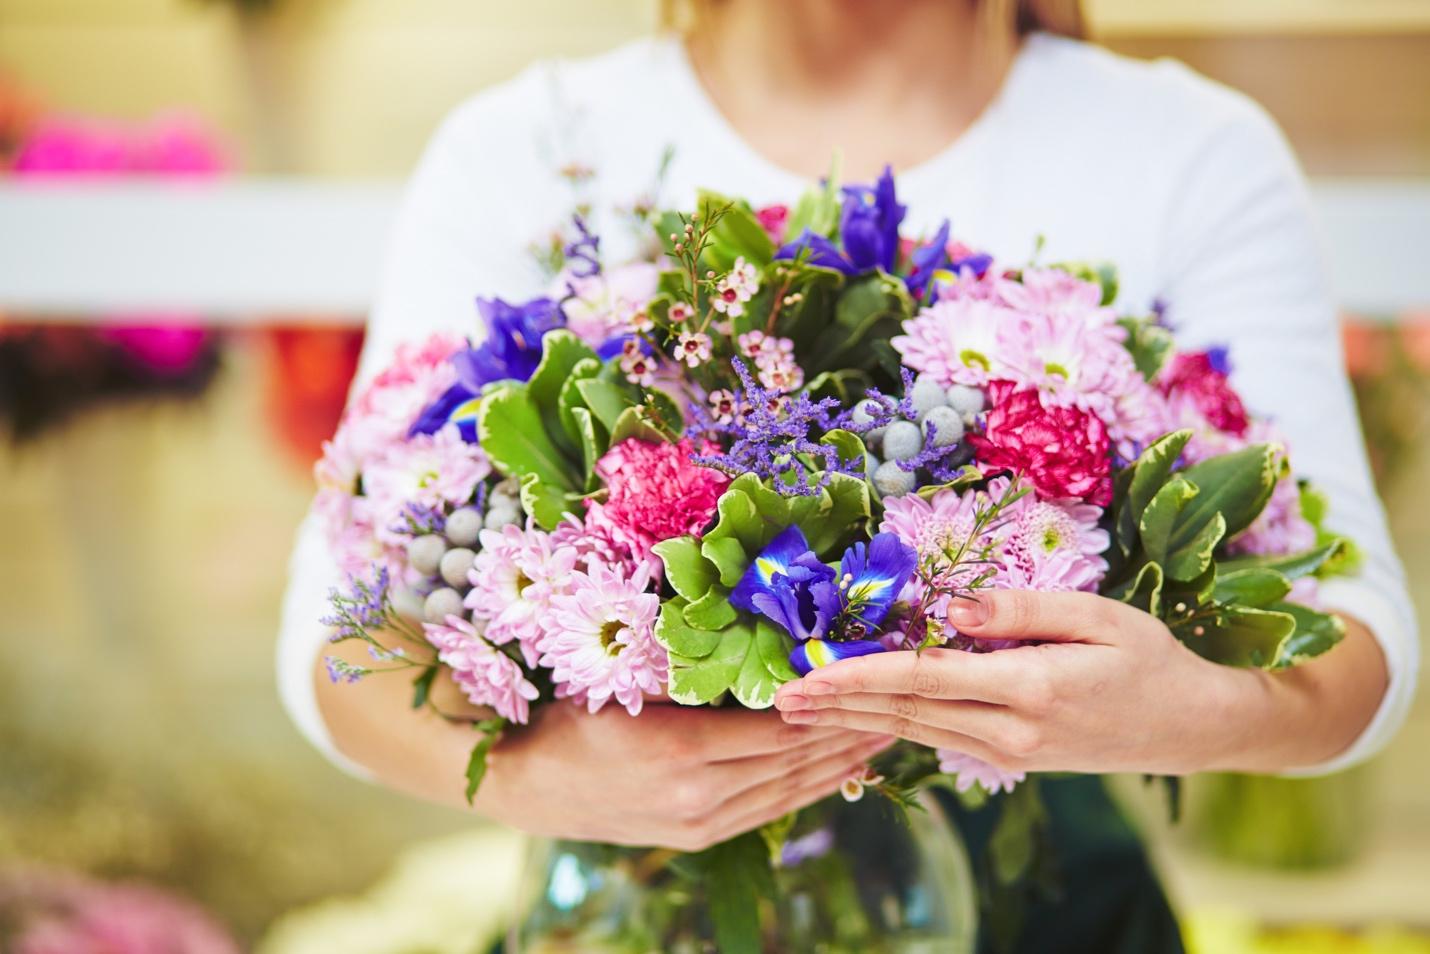 Bouquet Budgeting: How Much to Spend on a Bouquet of Flowers